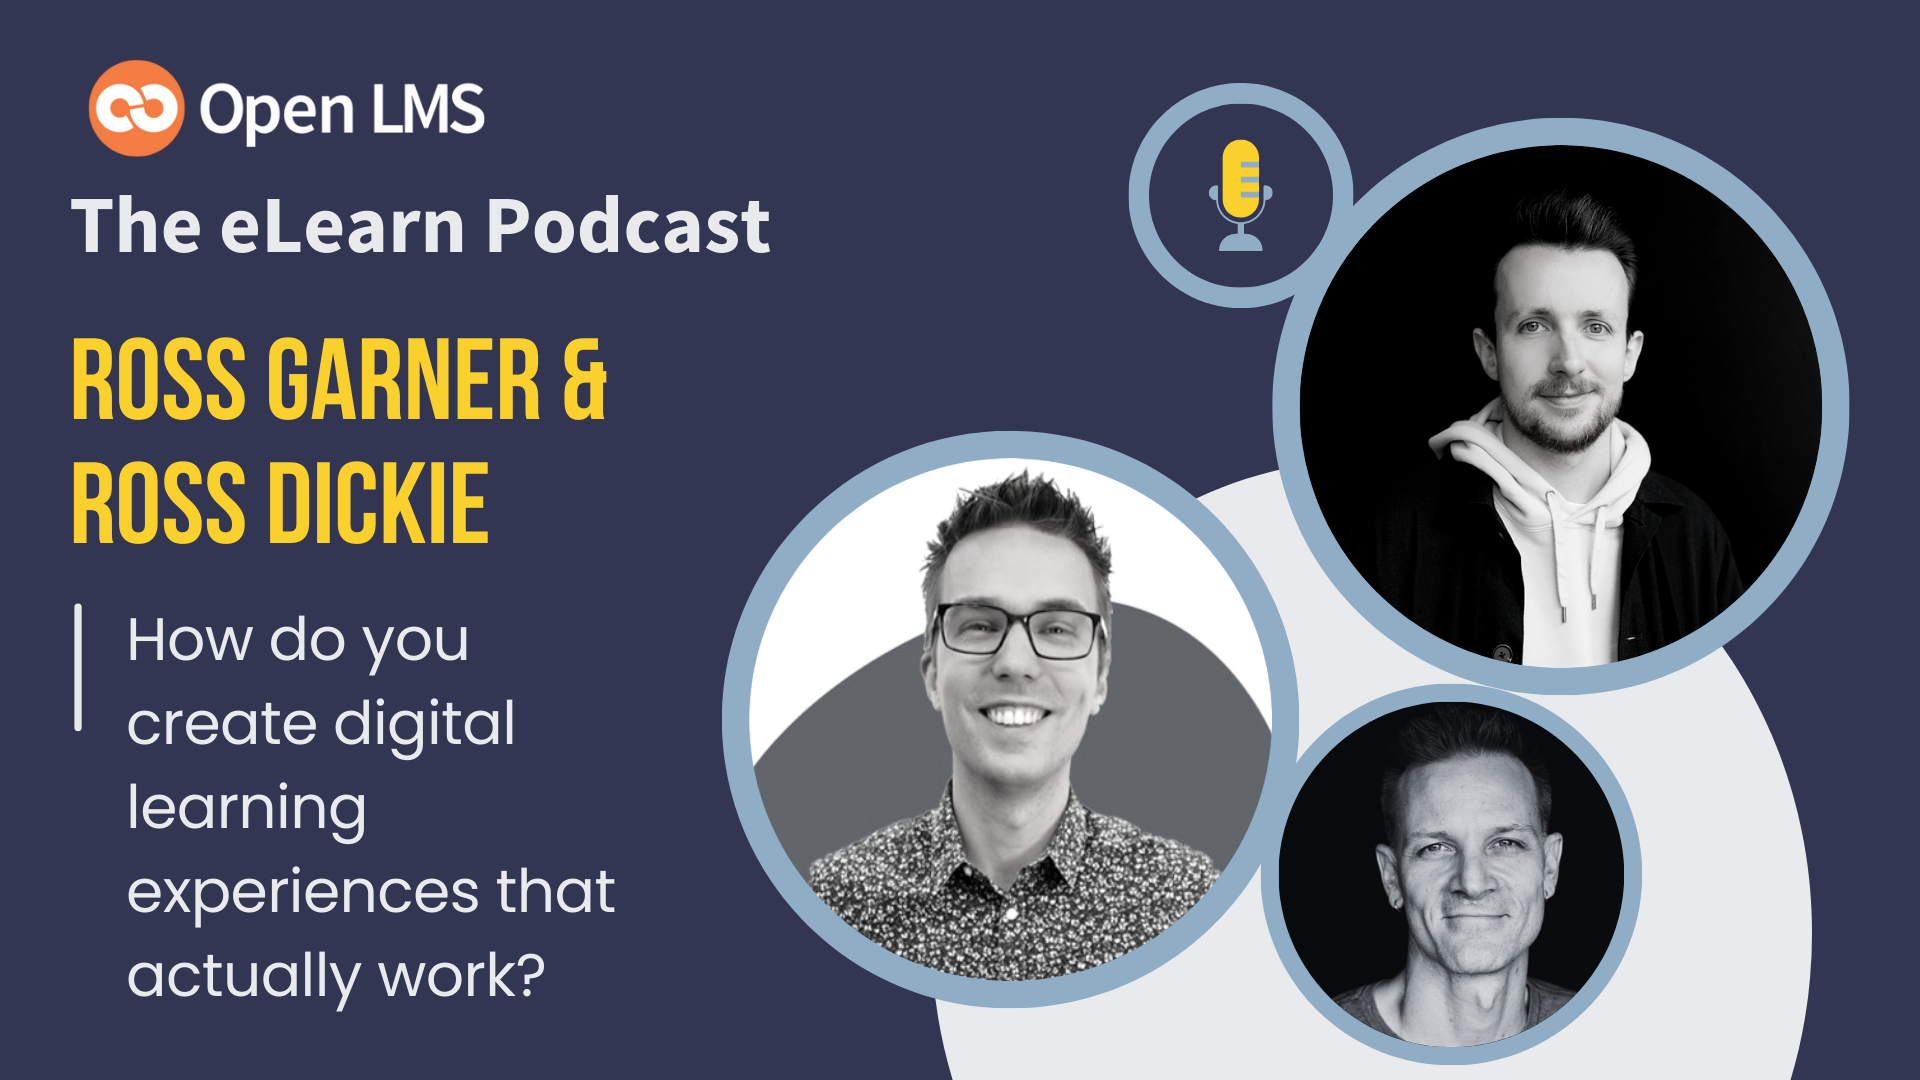 How Do You Create Digital Learning Experiences That Actually Work? with Ross Garner & Ross Dickie